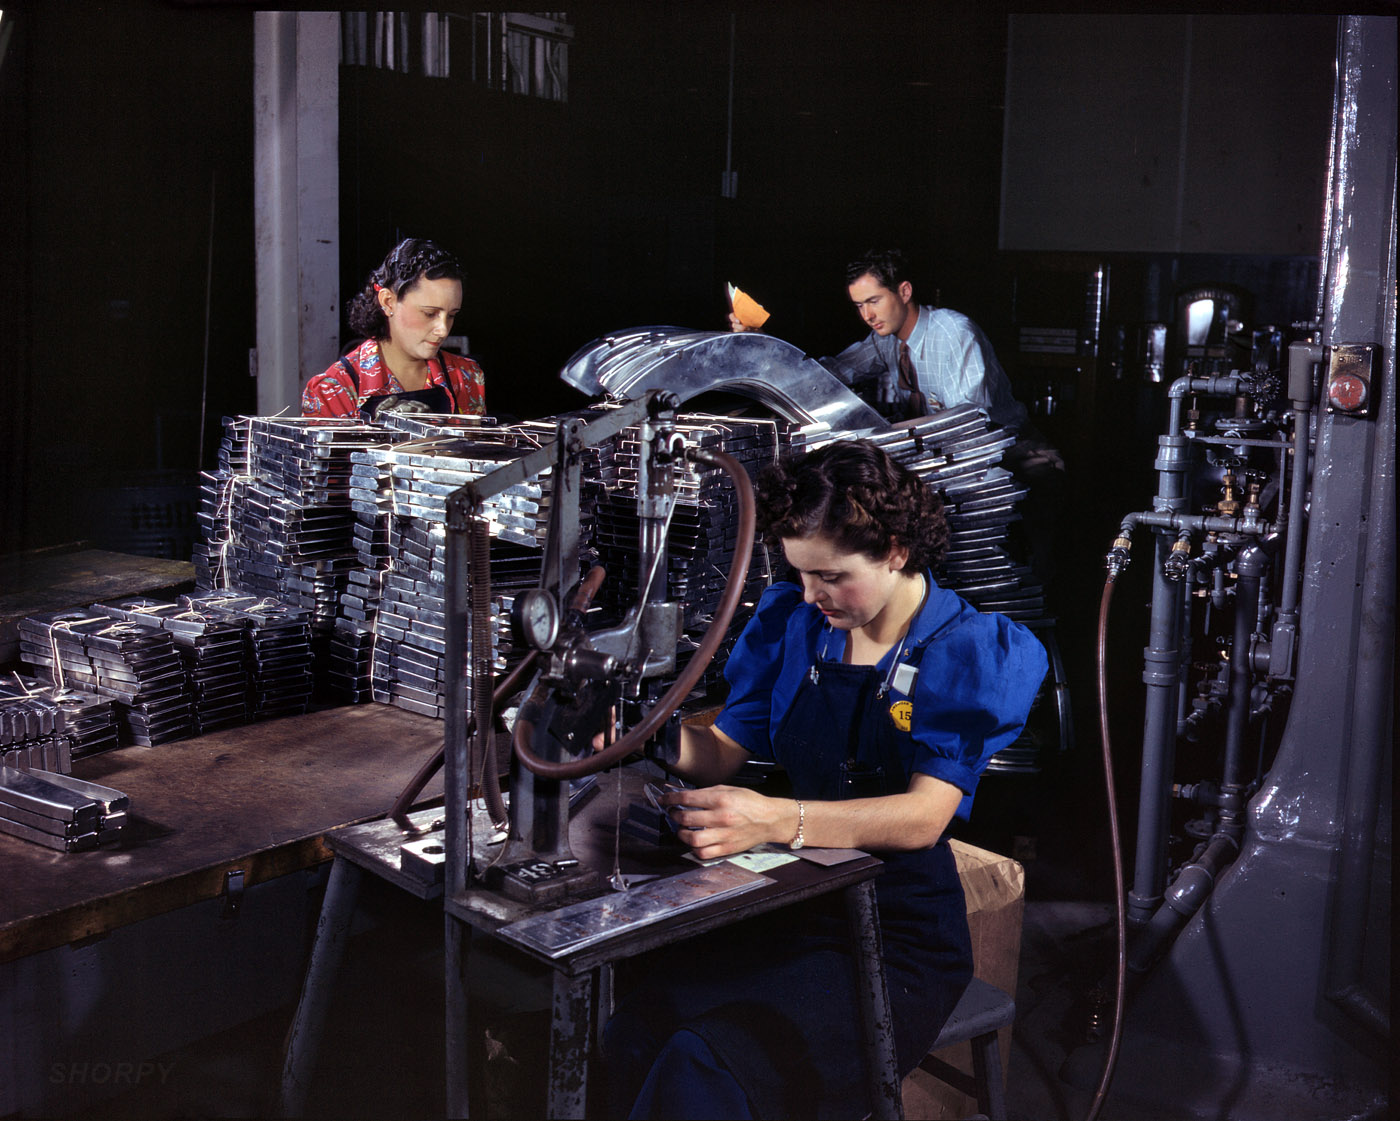 October 1942. Inglewood, Calif. "Parts are marked with this pneumatic numbering machine in North American Aviation's sheet metal department." 4x5 Kodachrome transparency by Alfred Palmer, Office of War Information. View full size.